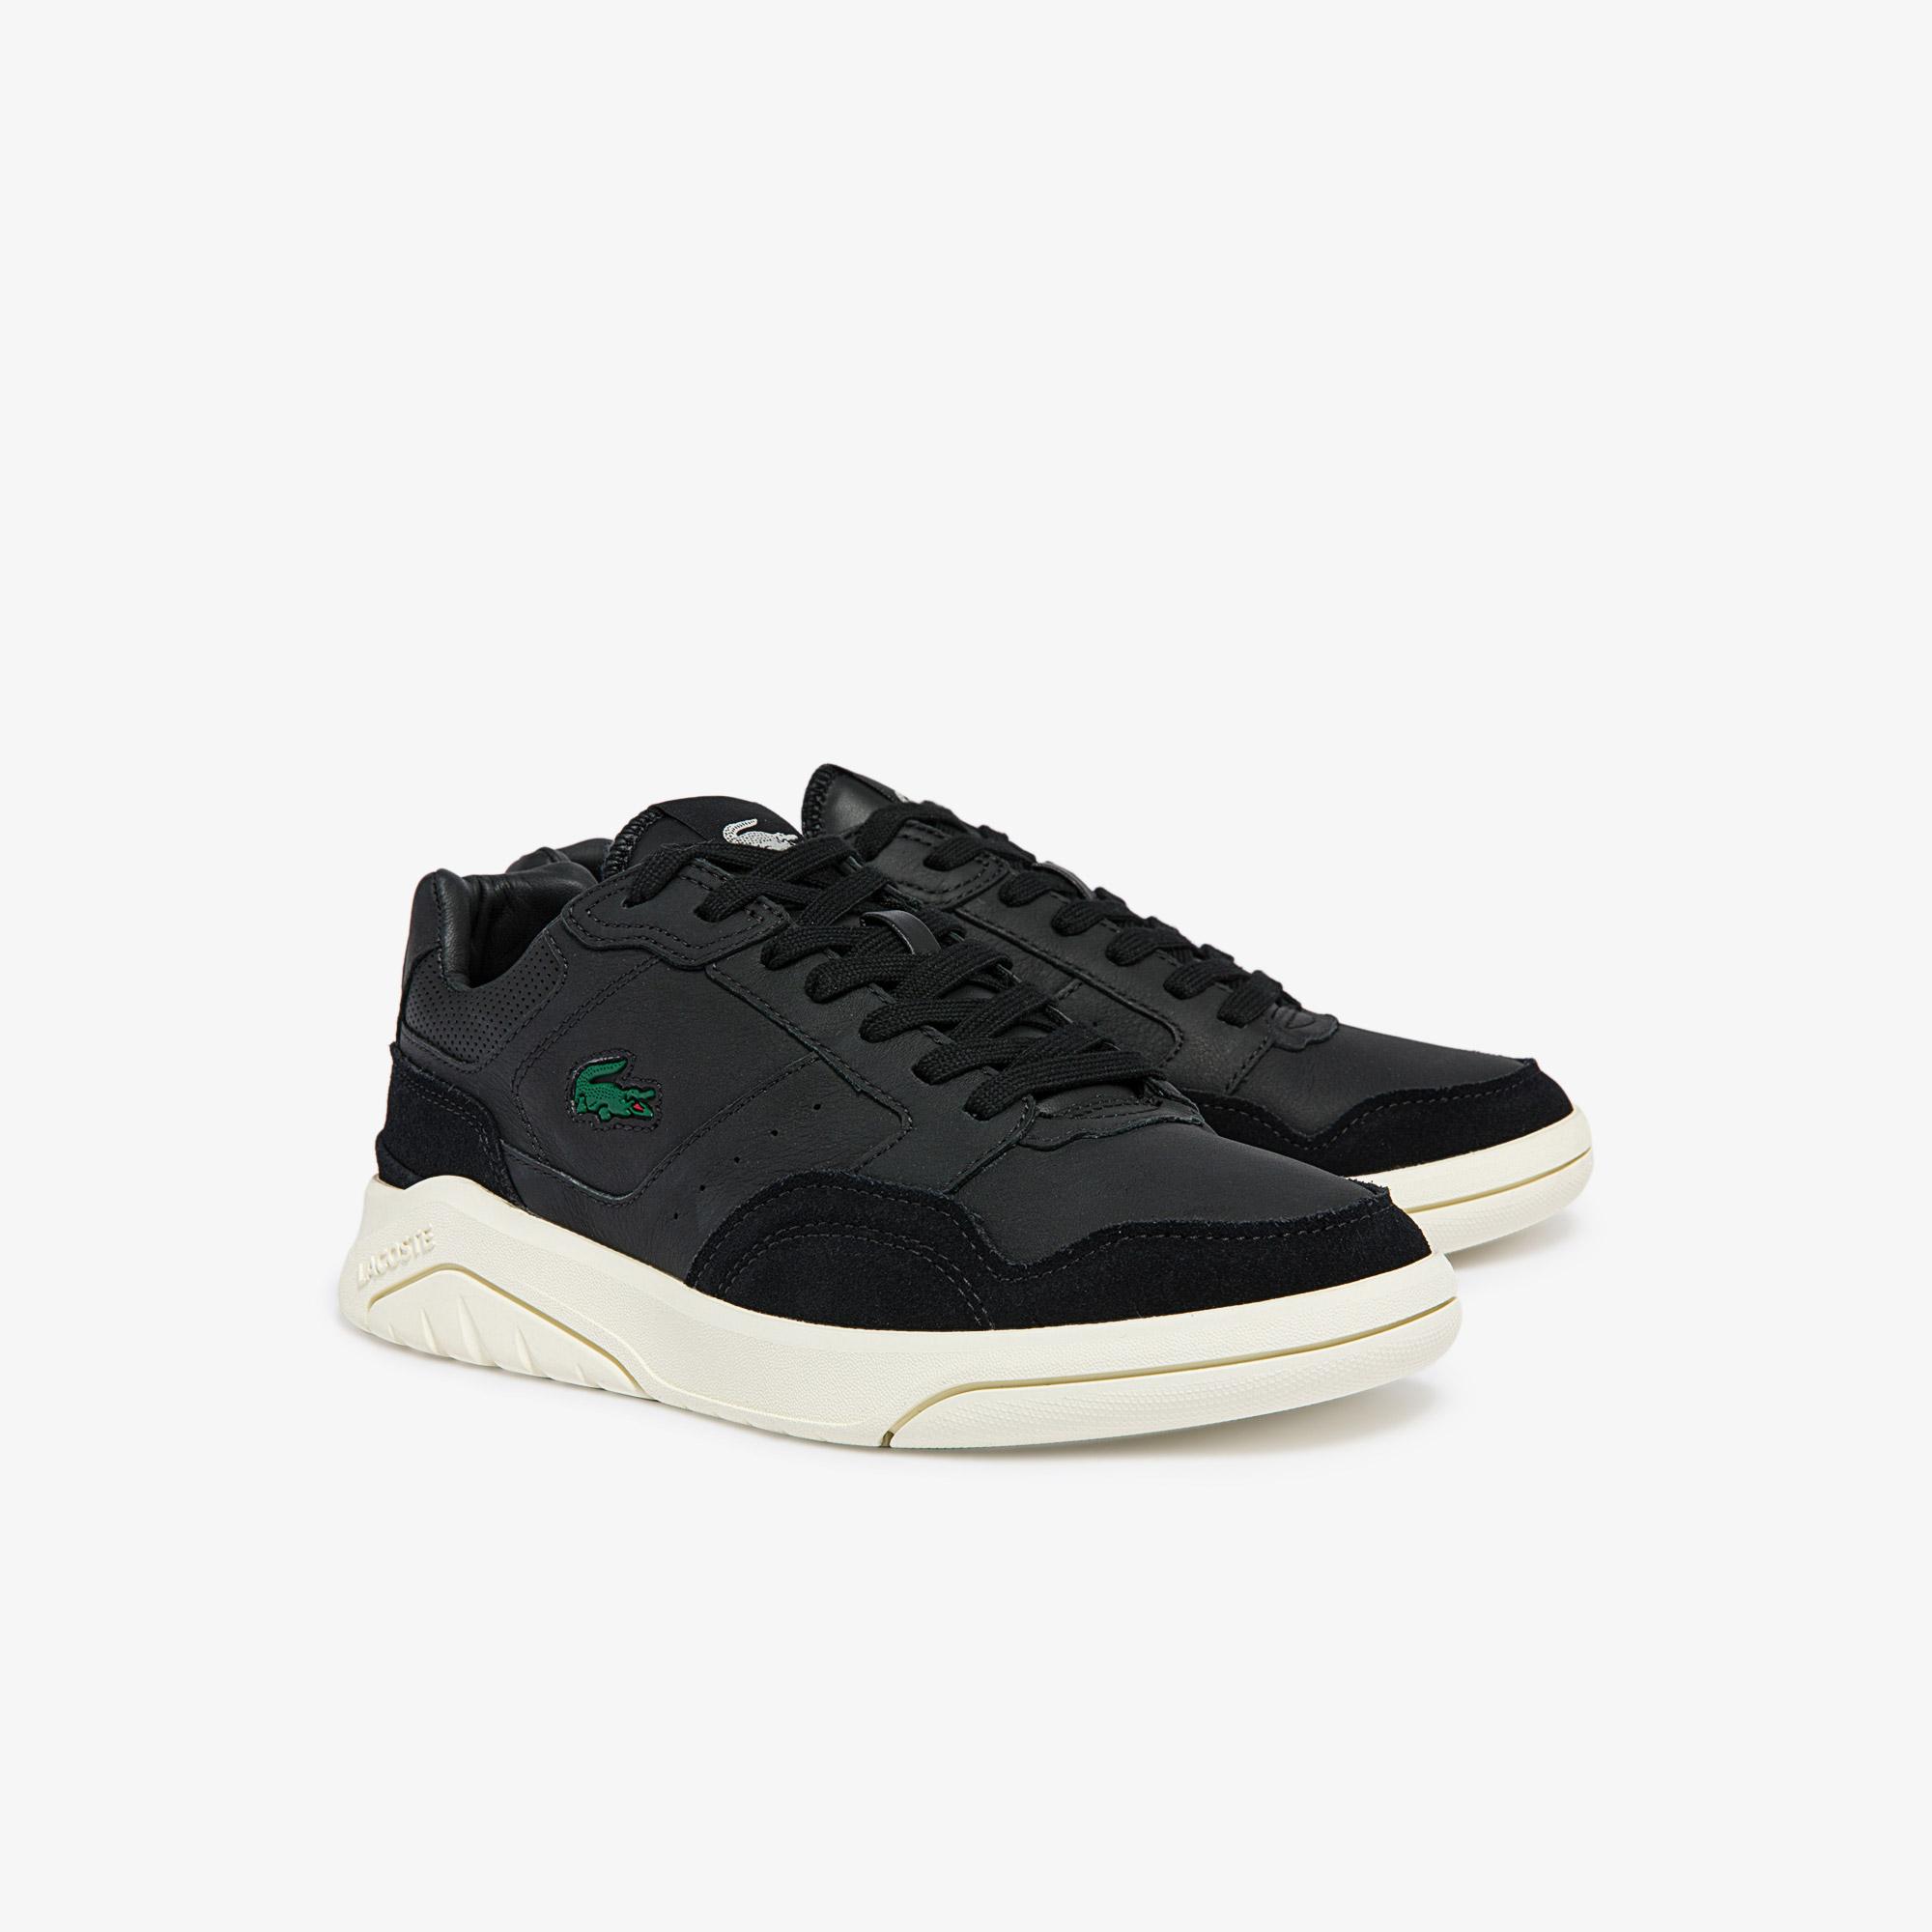 Lacoste Men's Game Advance Sneakers. 3